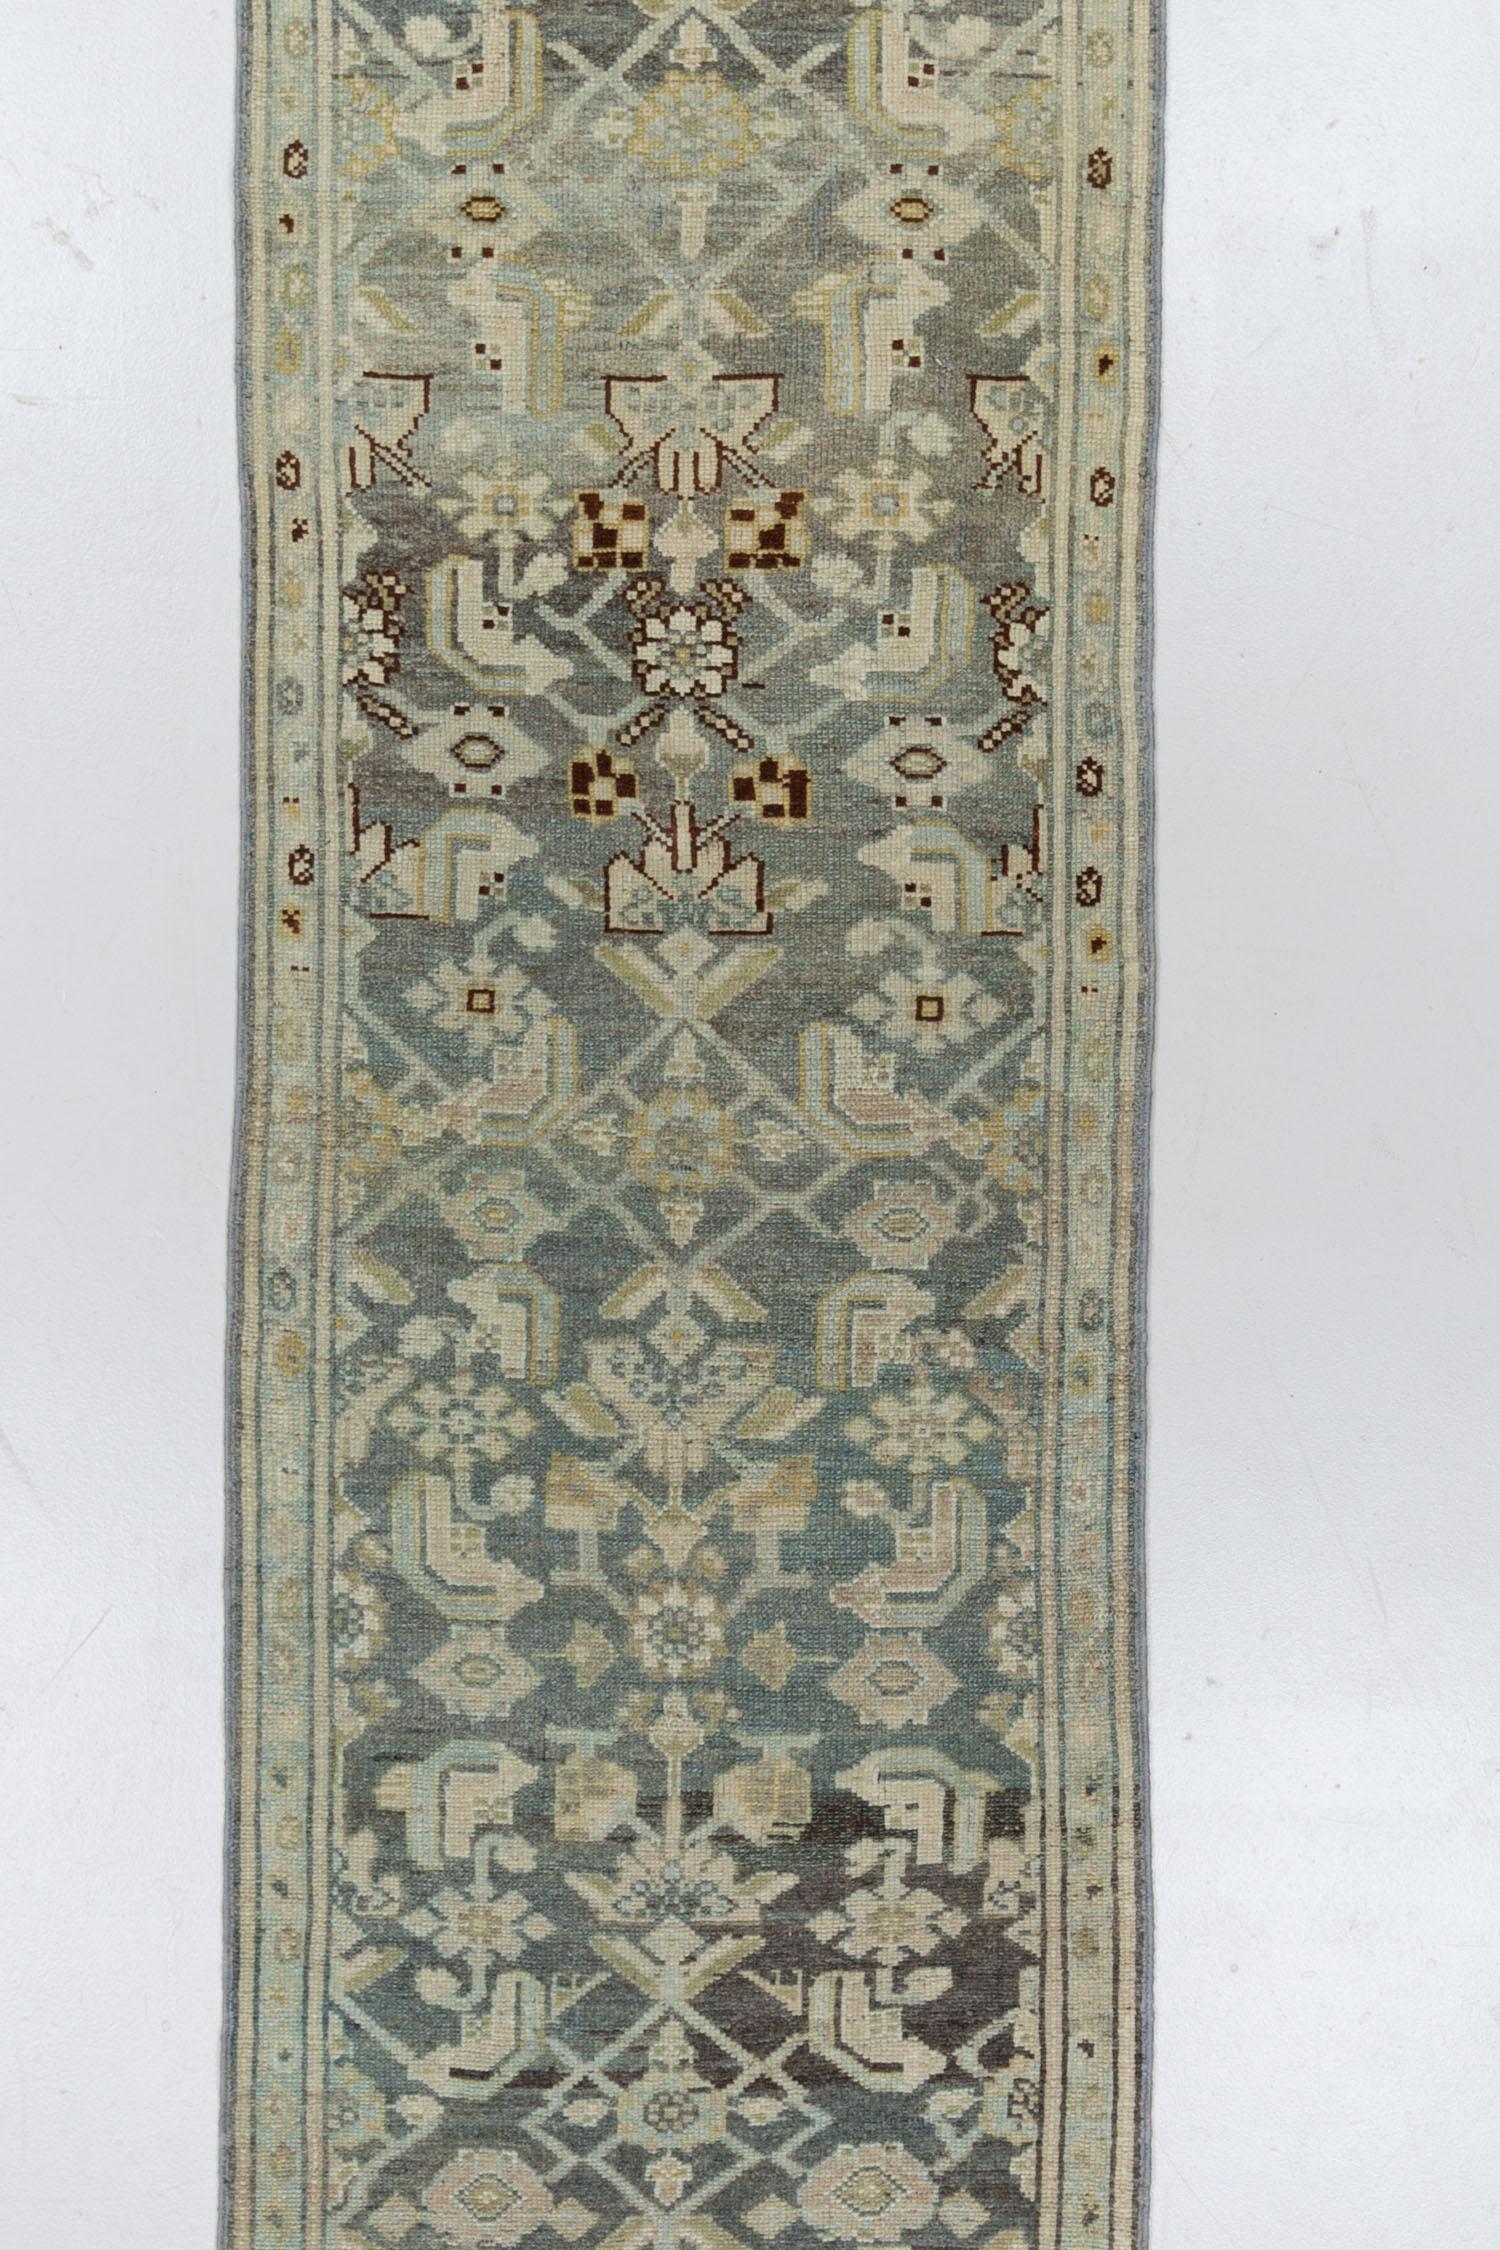 This antique Persian runner showcases a deep majestic blue field, serving as the canvas for the classic pattern that illustrates the rich heritage and craftsmanship of Persian rug weaving. The long, skinny dimensions, hard to find in the market,